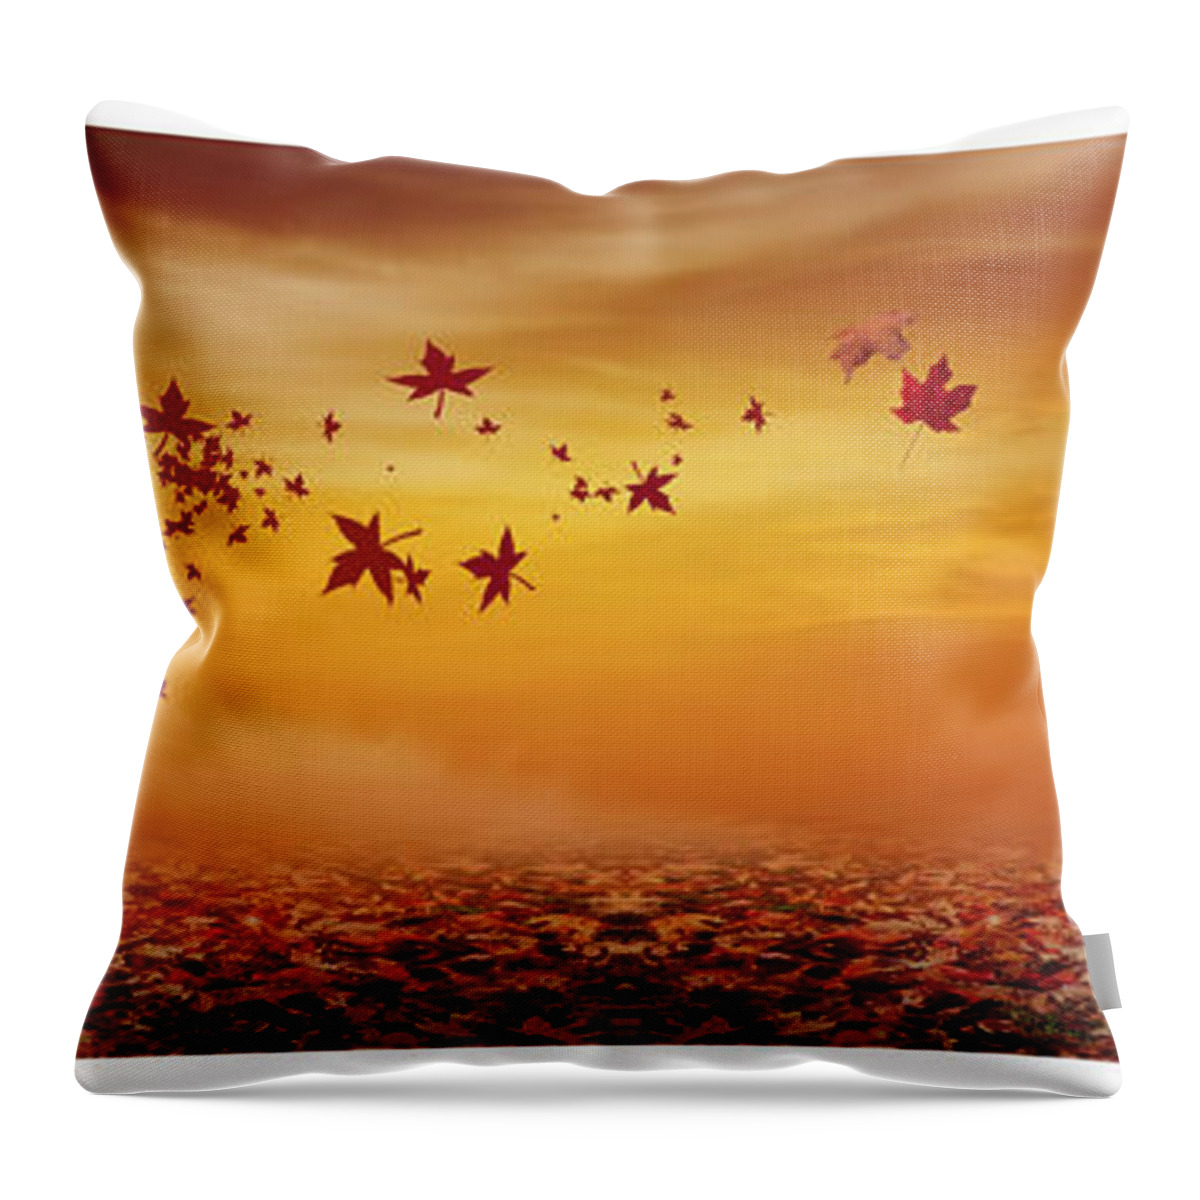 Maple Tree Throw Pillow featuring the photograph Nature's Art by Lourry Legarde